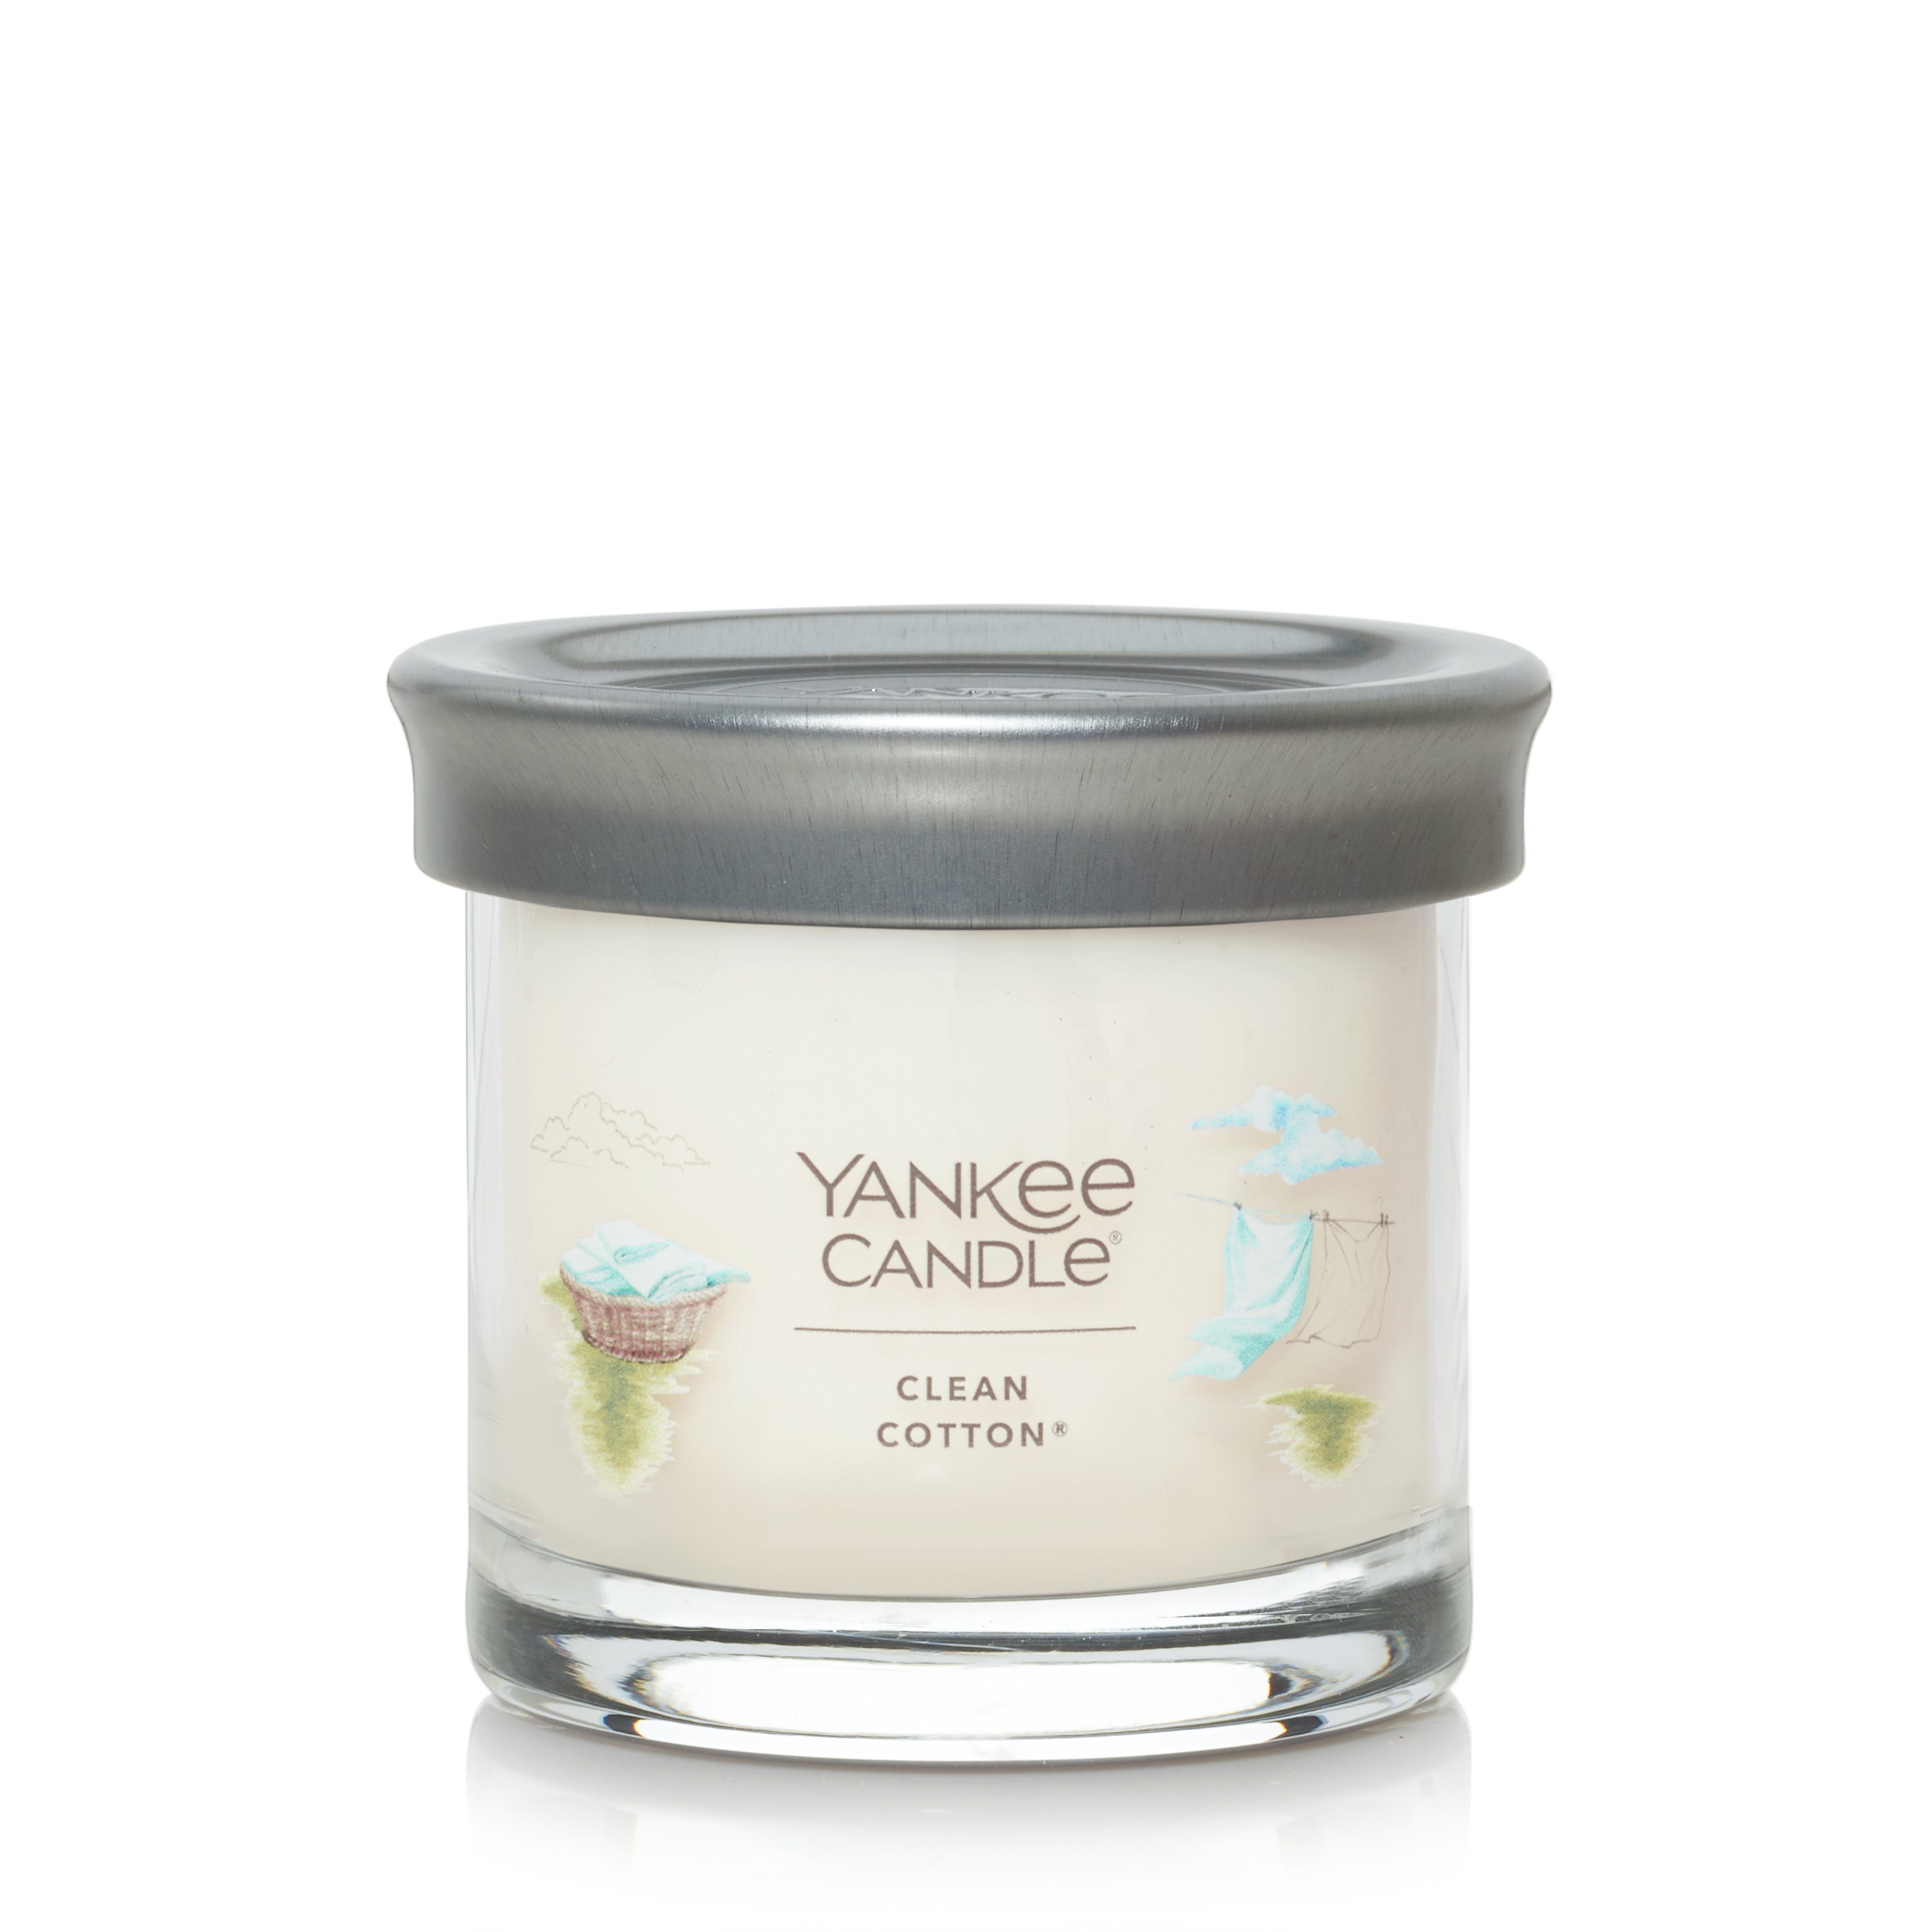 Yankee Clean Cotton Candle - Scented Candle in Glass, mini